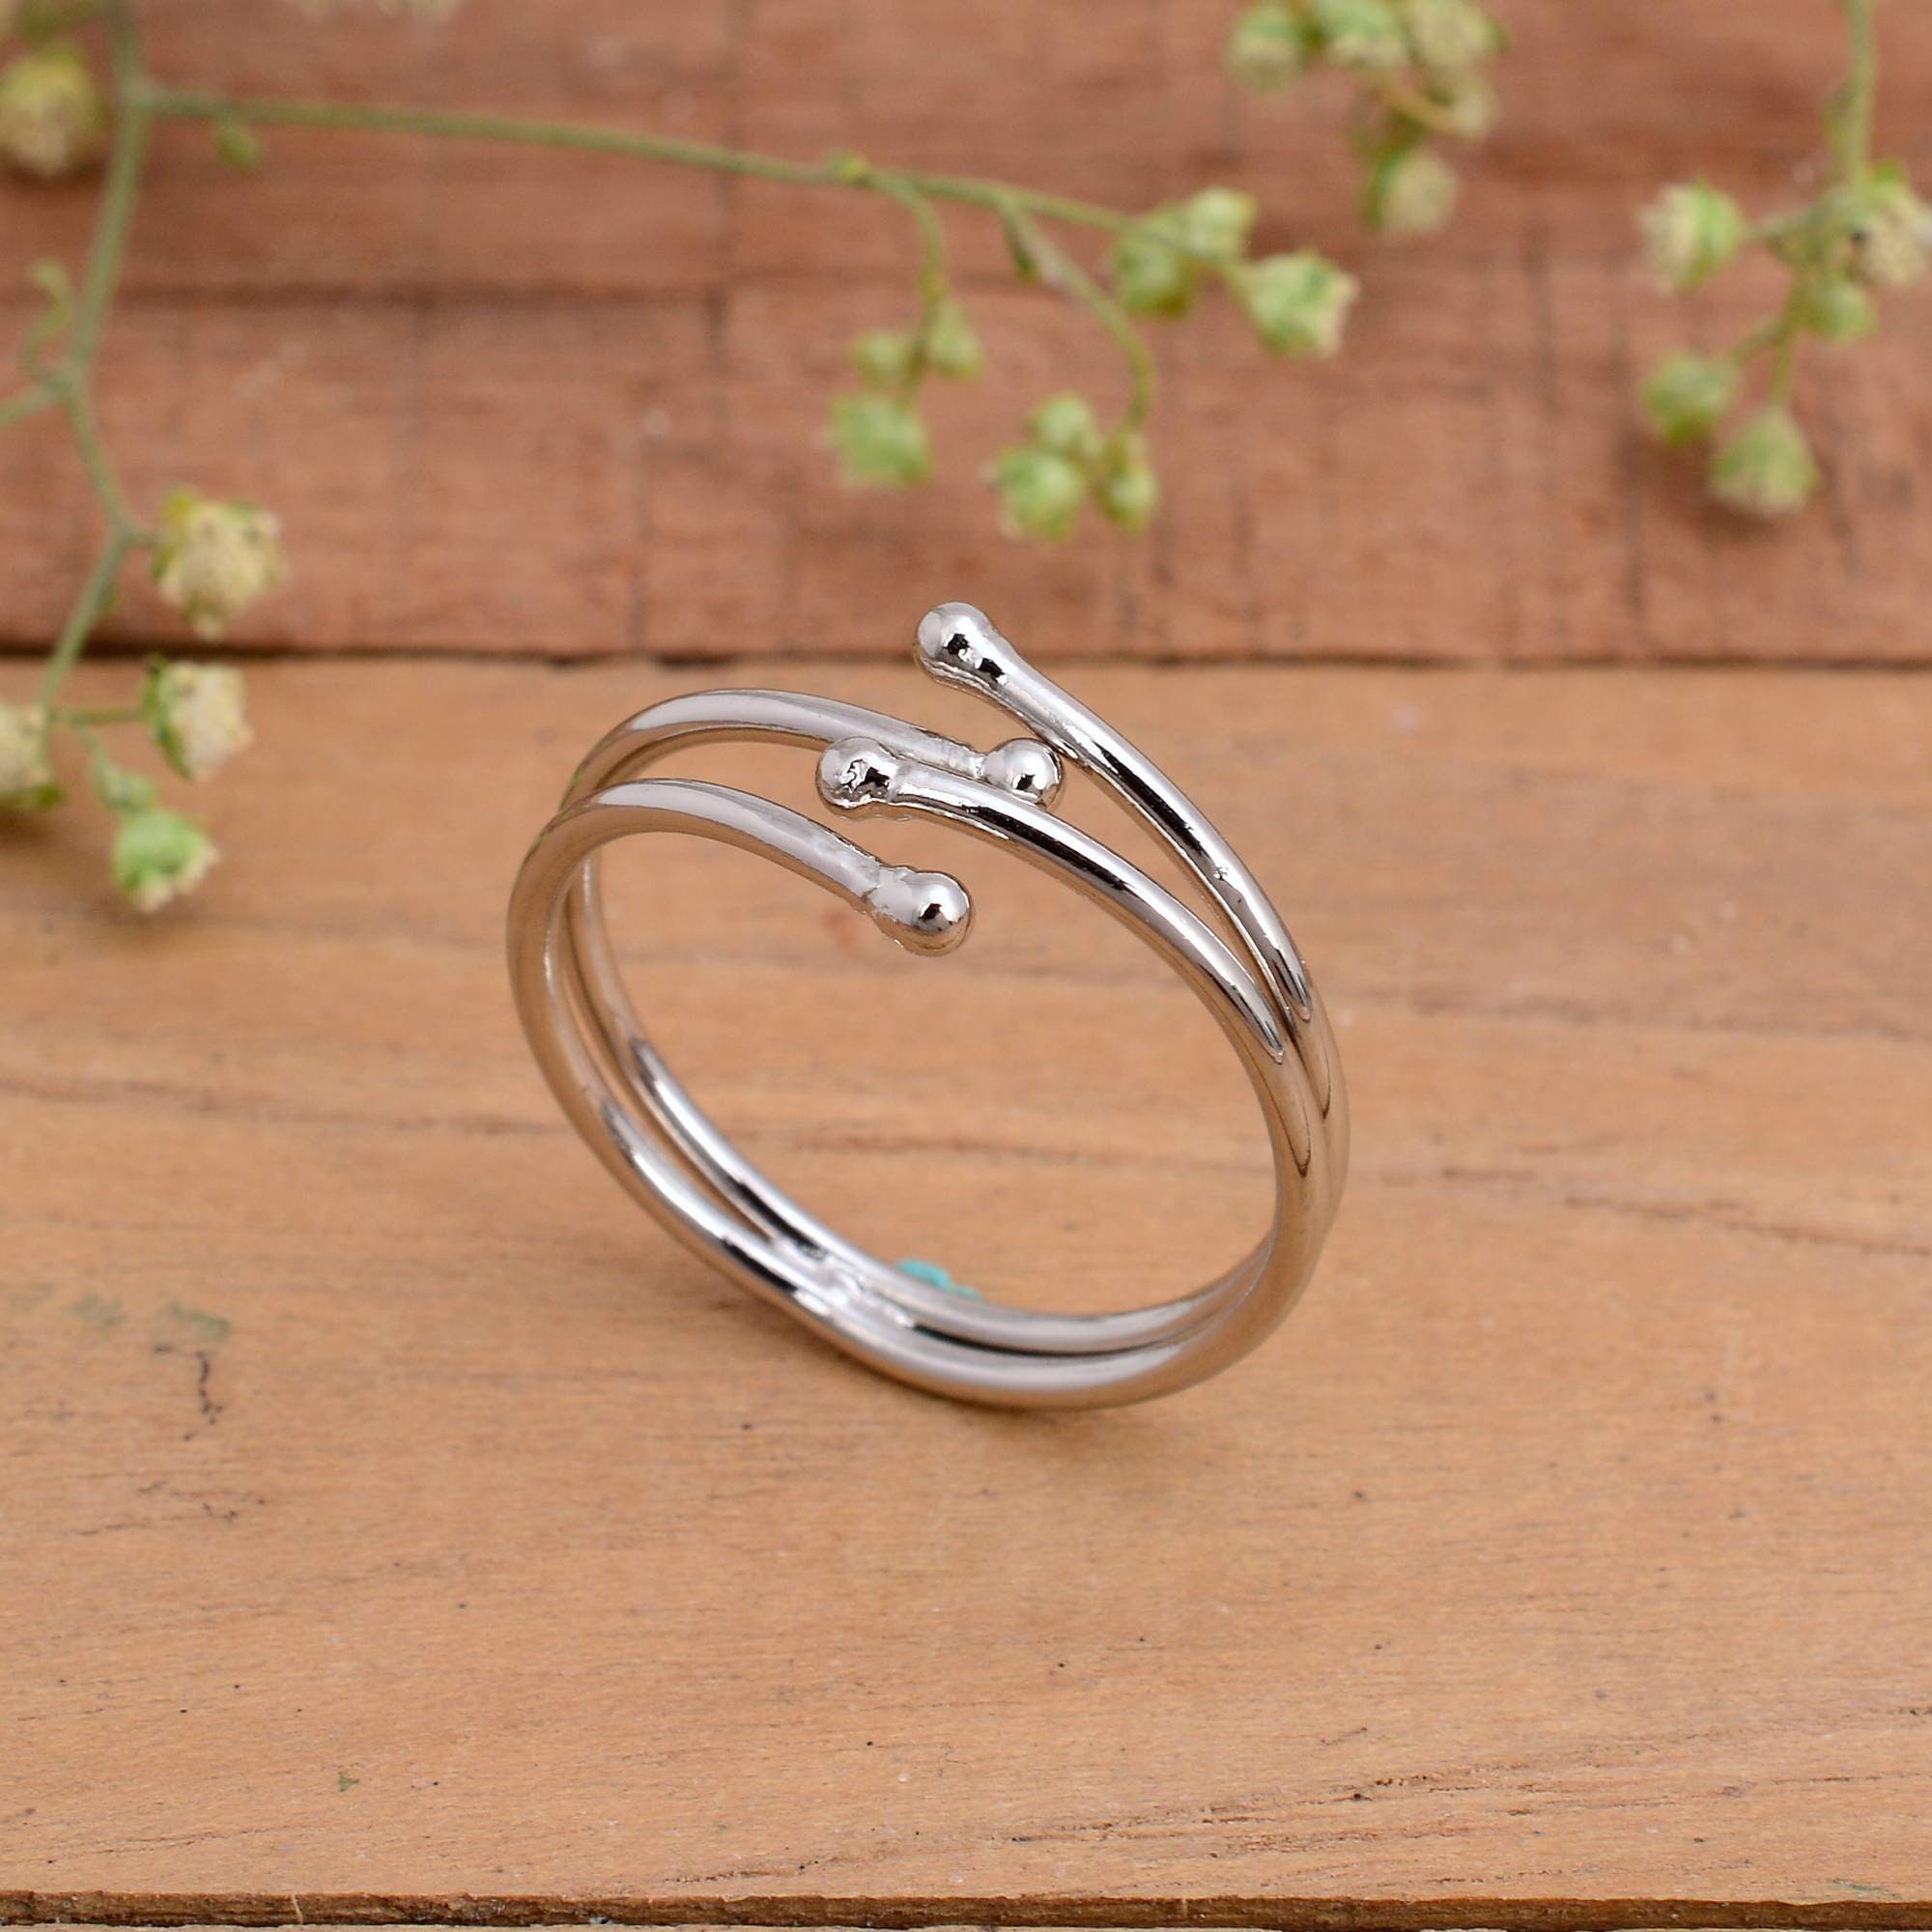 Silver dolphin ring adjustable 5-6-7-8 Sterling Silver ring for her •  Ladies silver ring gift• High polished, Fast free shipping sizes - Jewelry  Network Inc